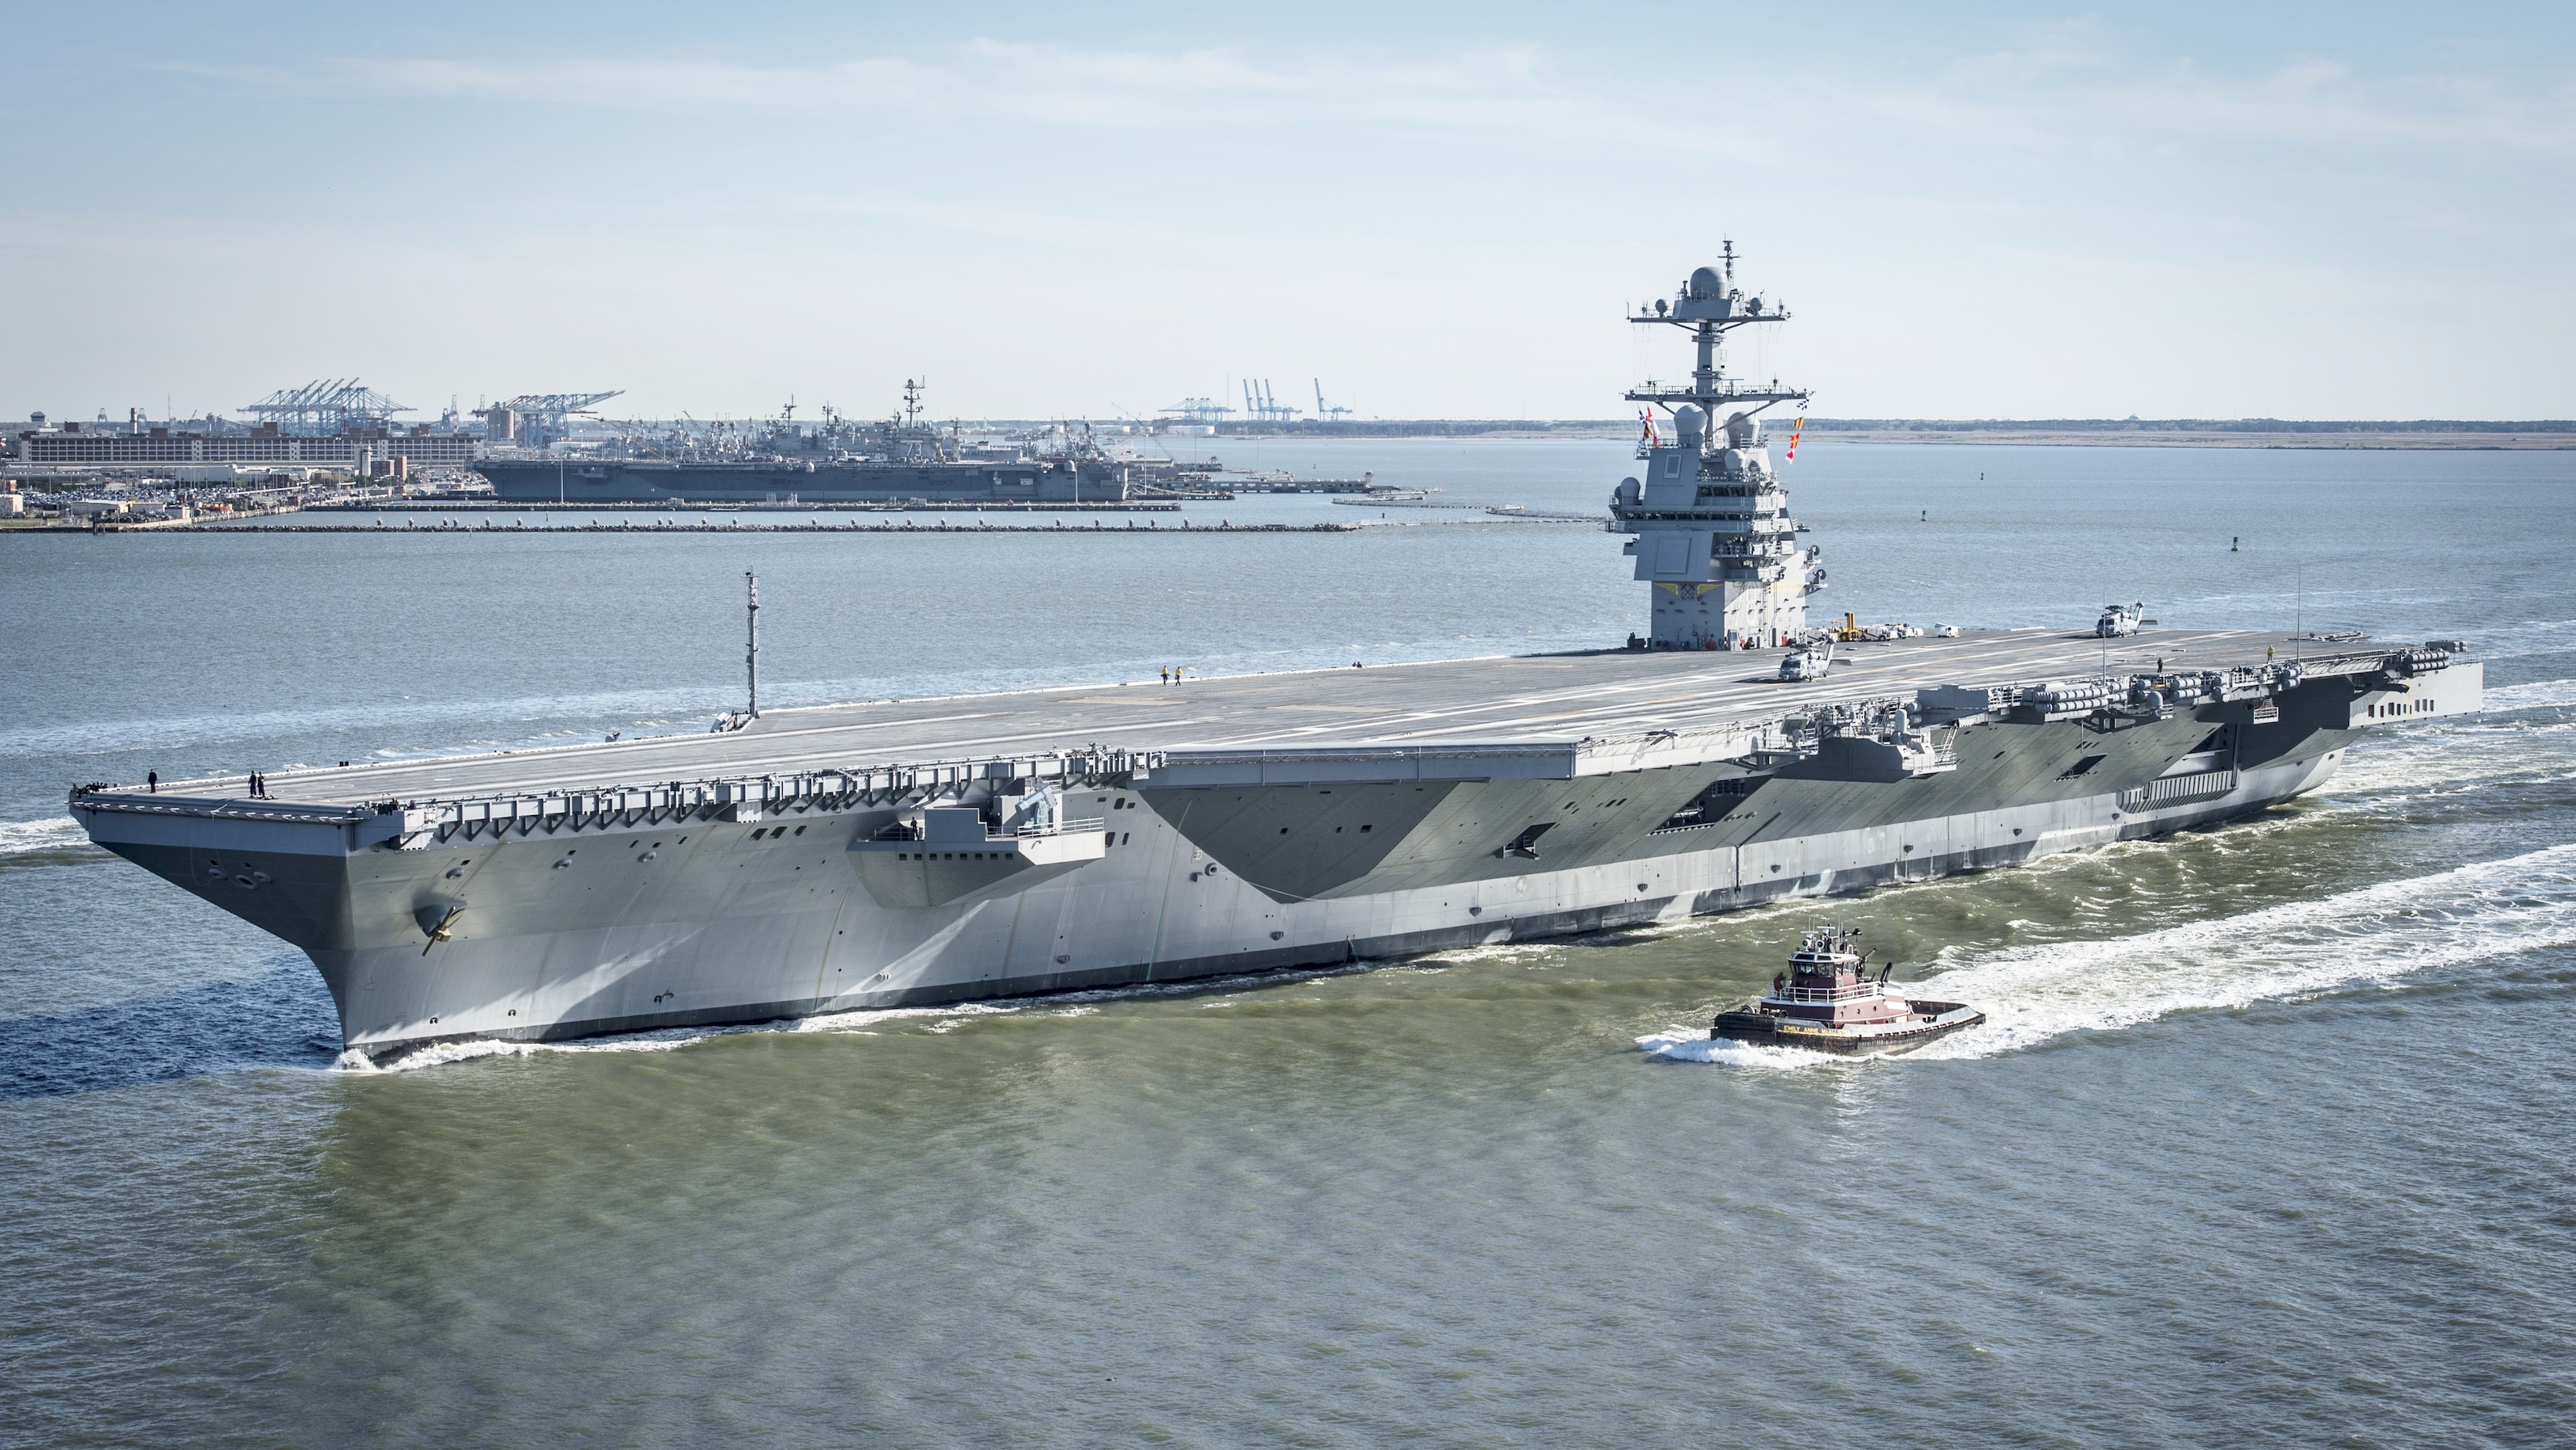 The USS Gerald R. Ford is the biggest aircraft carrier in the world. 